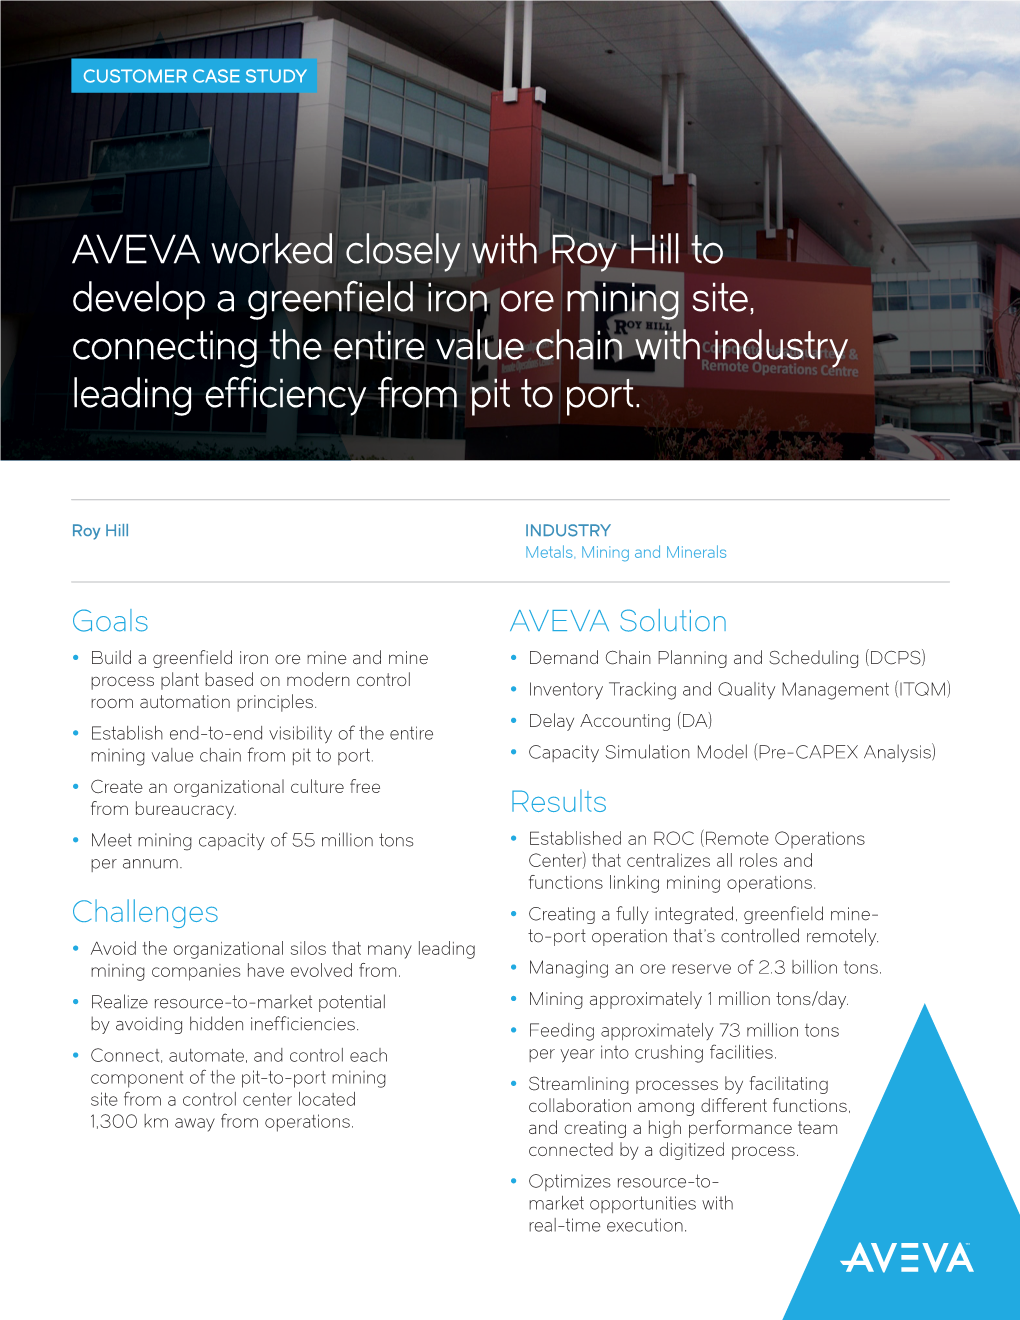 AVEVA Worked Closely with Roy Hill to Develop a Greenfield Iron Ore Mining Site, Connecting the Entire Value Chain with Industry Leading Efficiency from Pit to Port